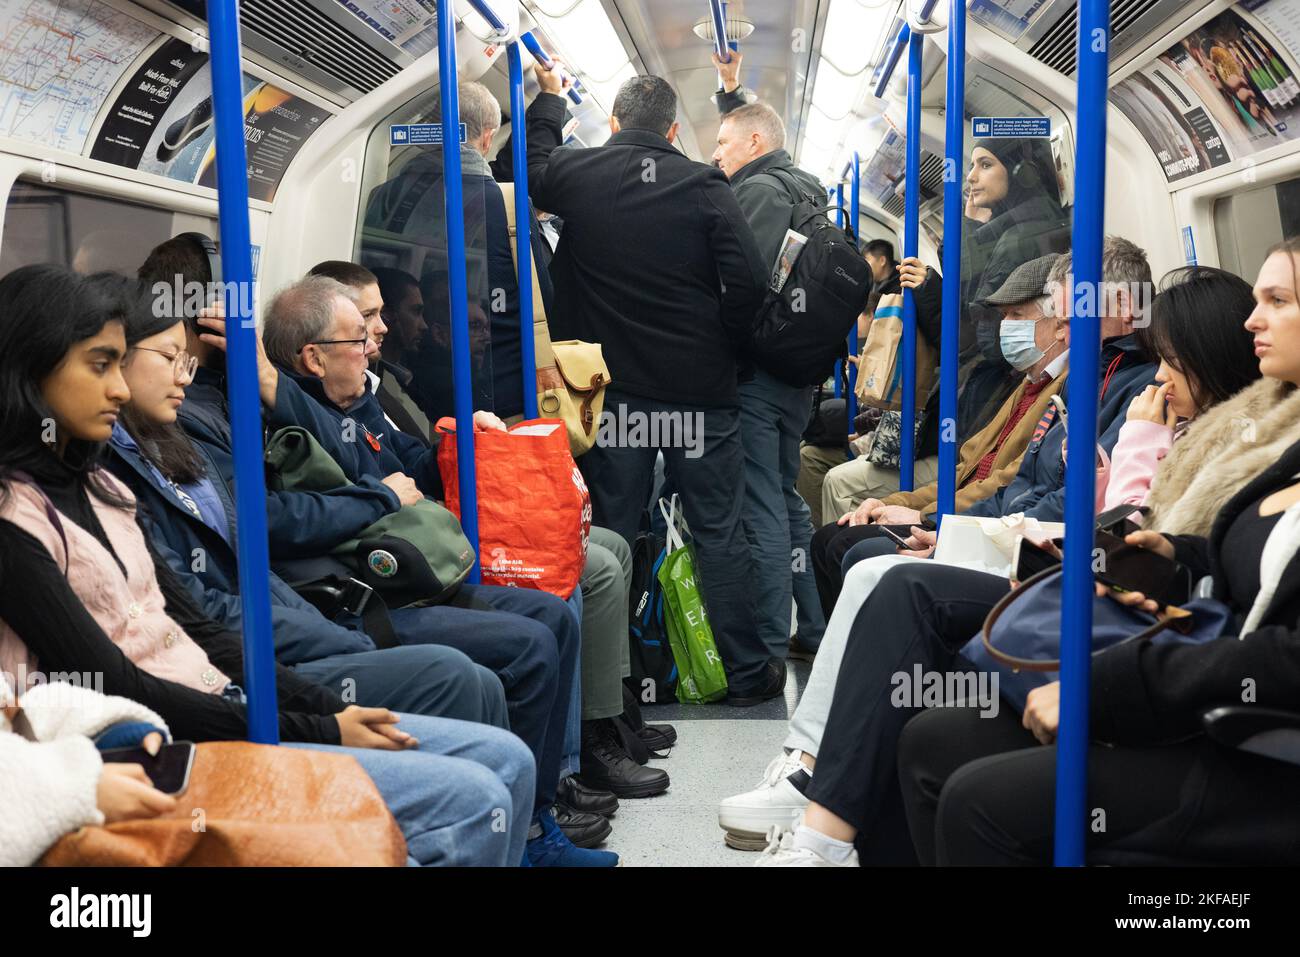 Crowded London Underground train, passengers  standing in the tube carriage interior, Piccadilly Line, TFL public transport, London UK Stock Photo